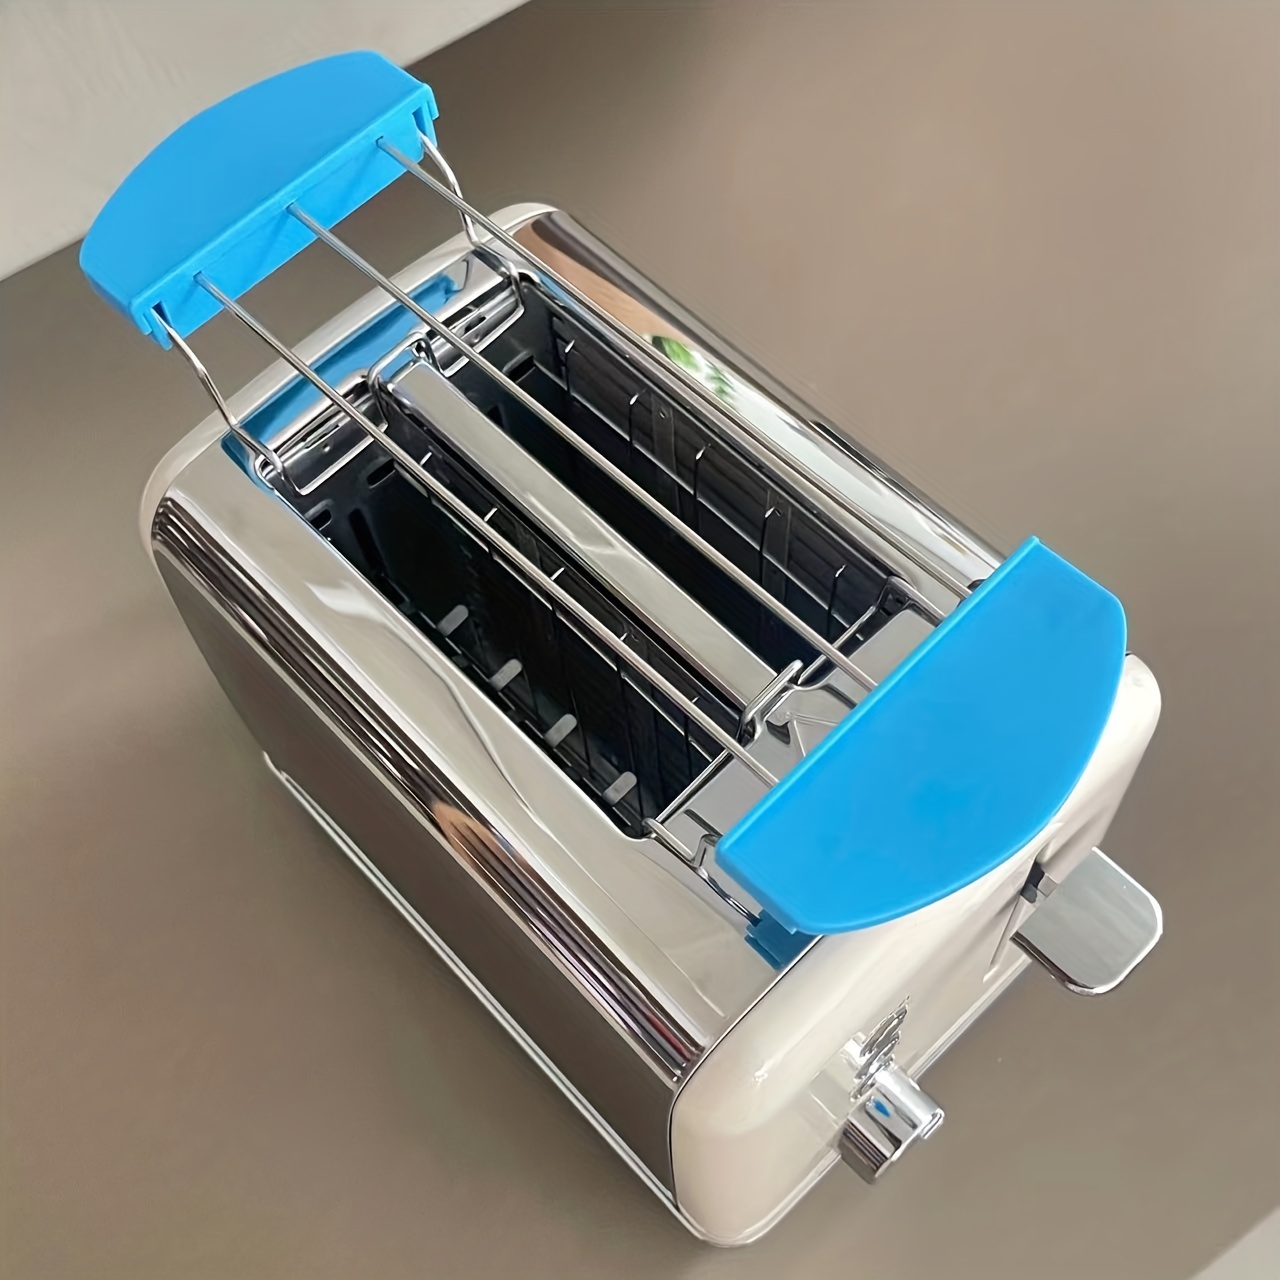 Healeved Grilling Accessories Toaster Warming Rack Bread Slice Holder  Holder Grill Warming Rack Sandwich Racks Practical Toaster Accessory  Griddle